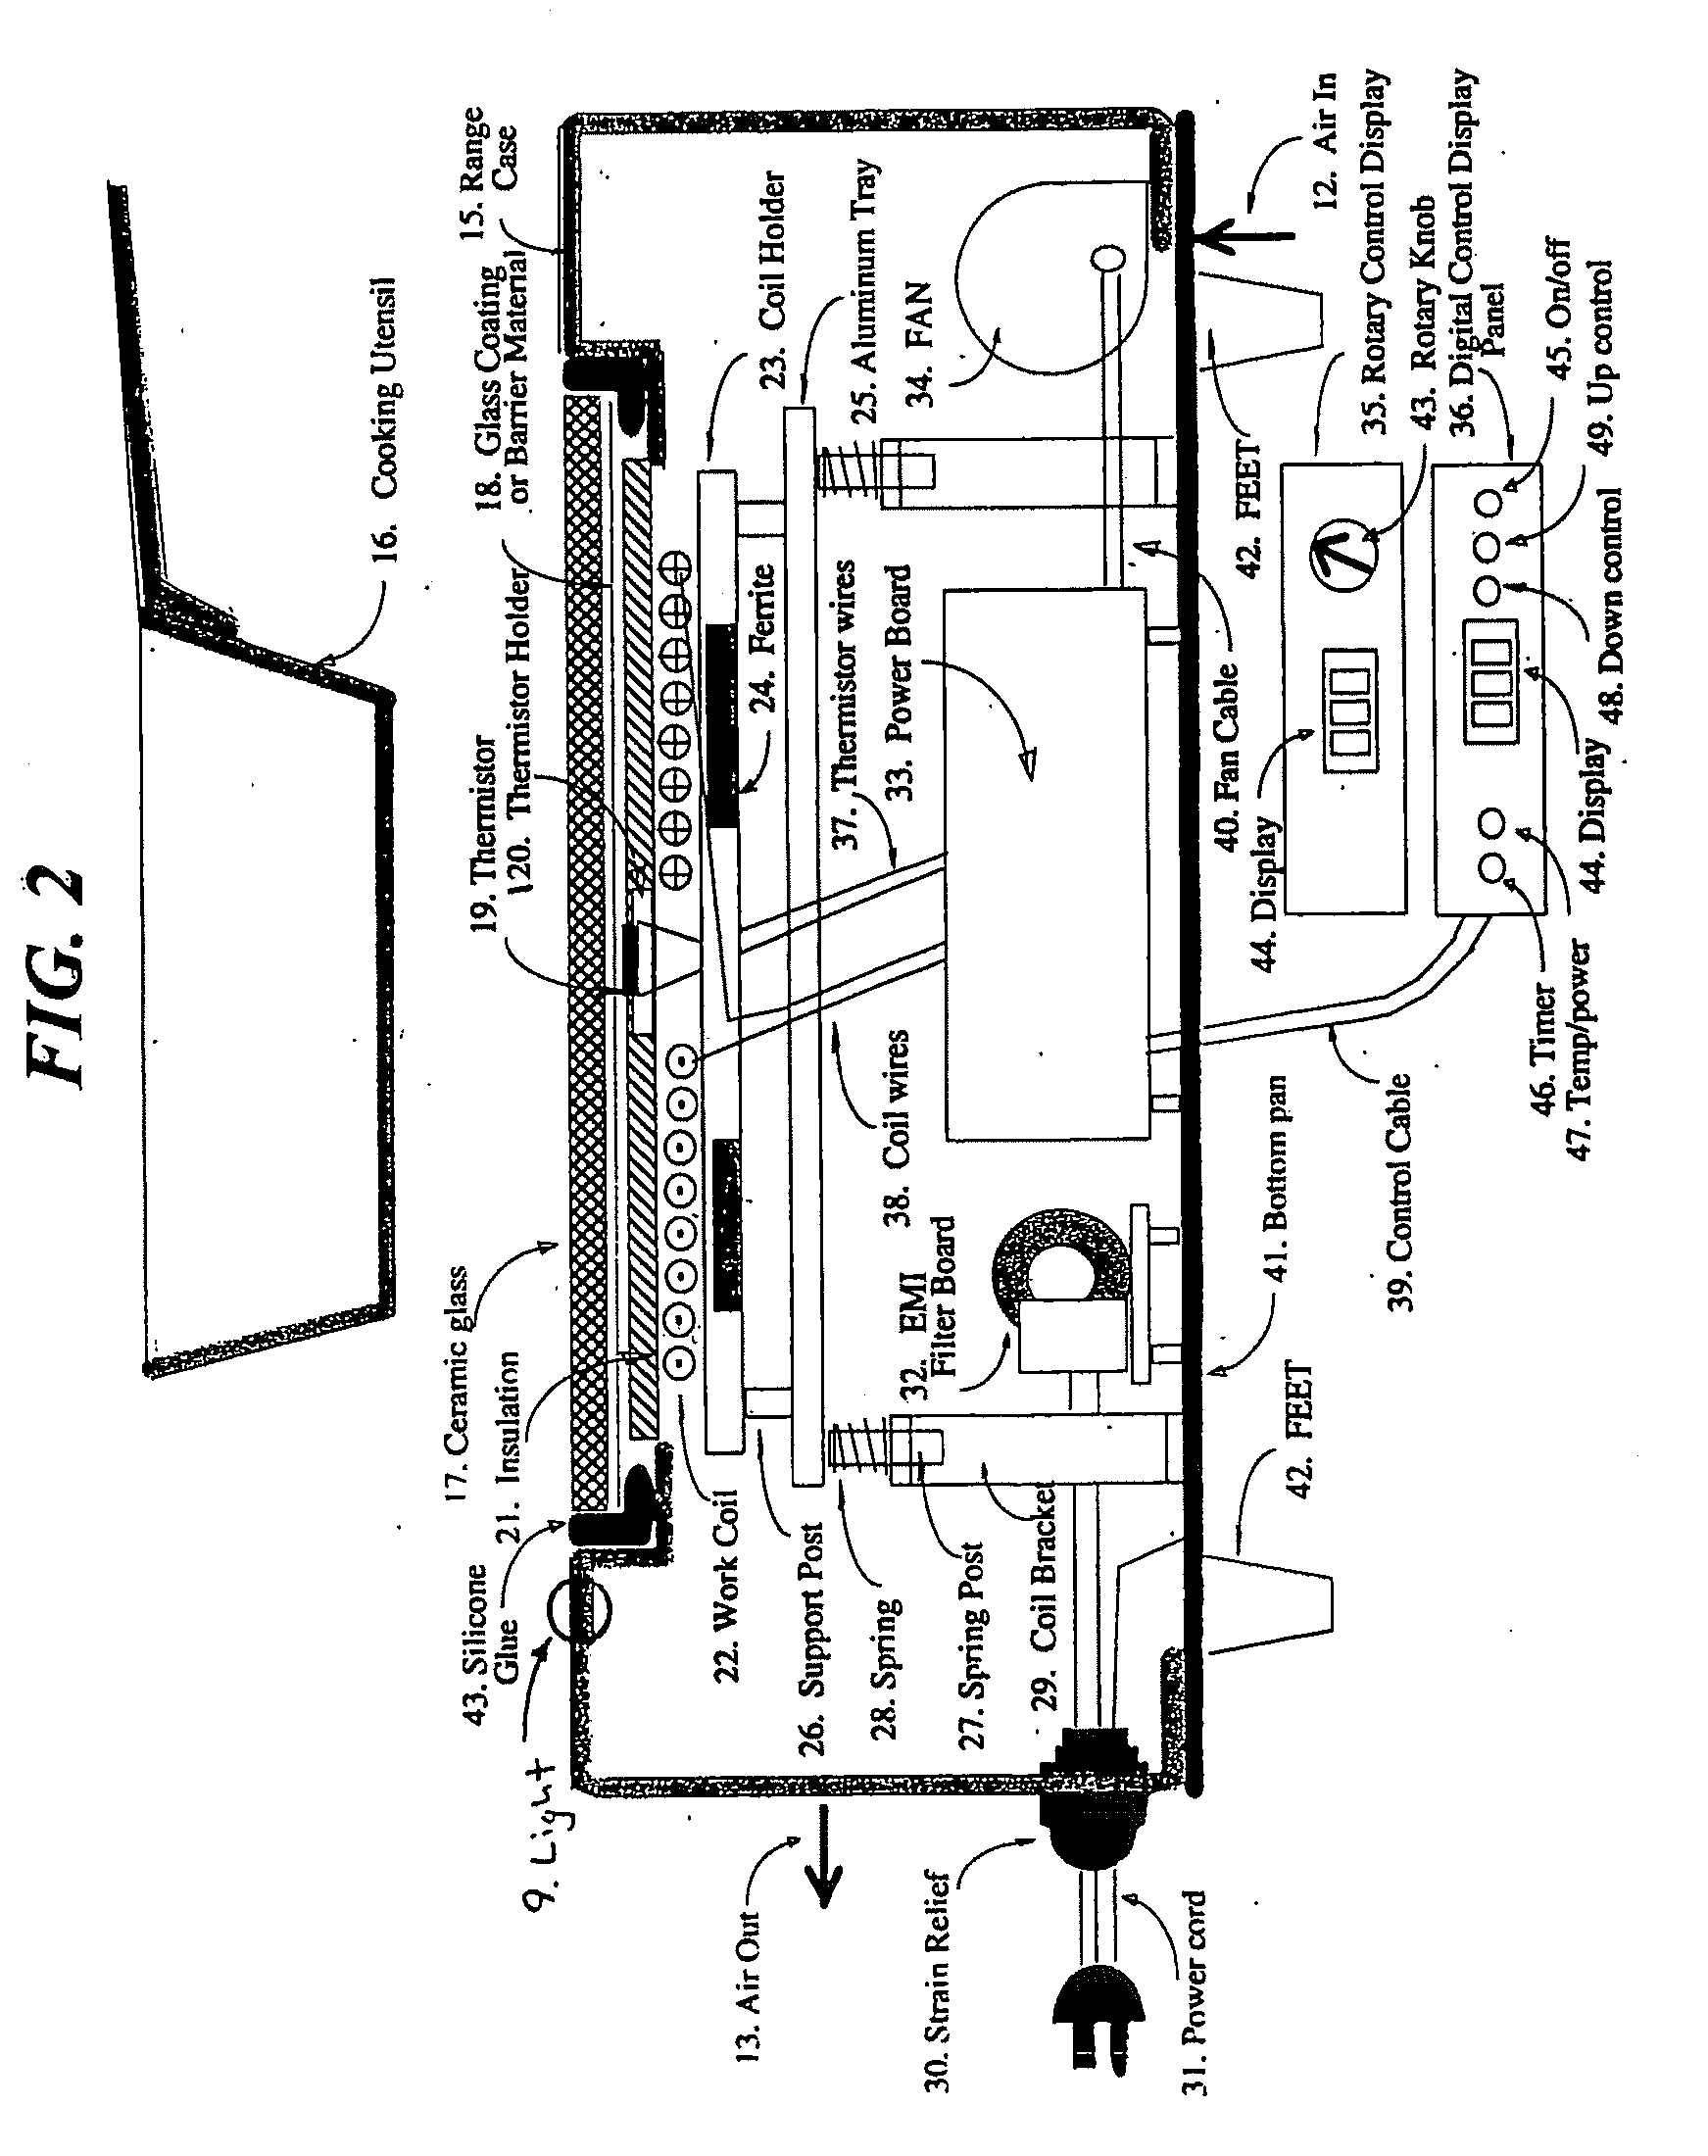 Induction Heating and Control System and Method with High Reliability and Advanced Performance Features